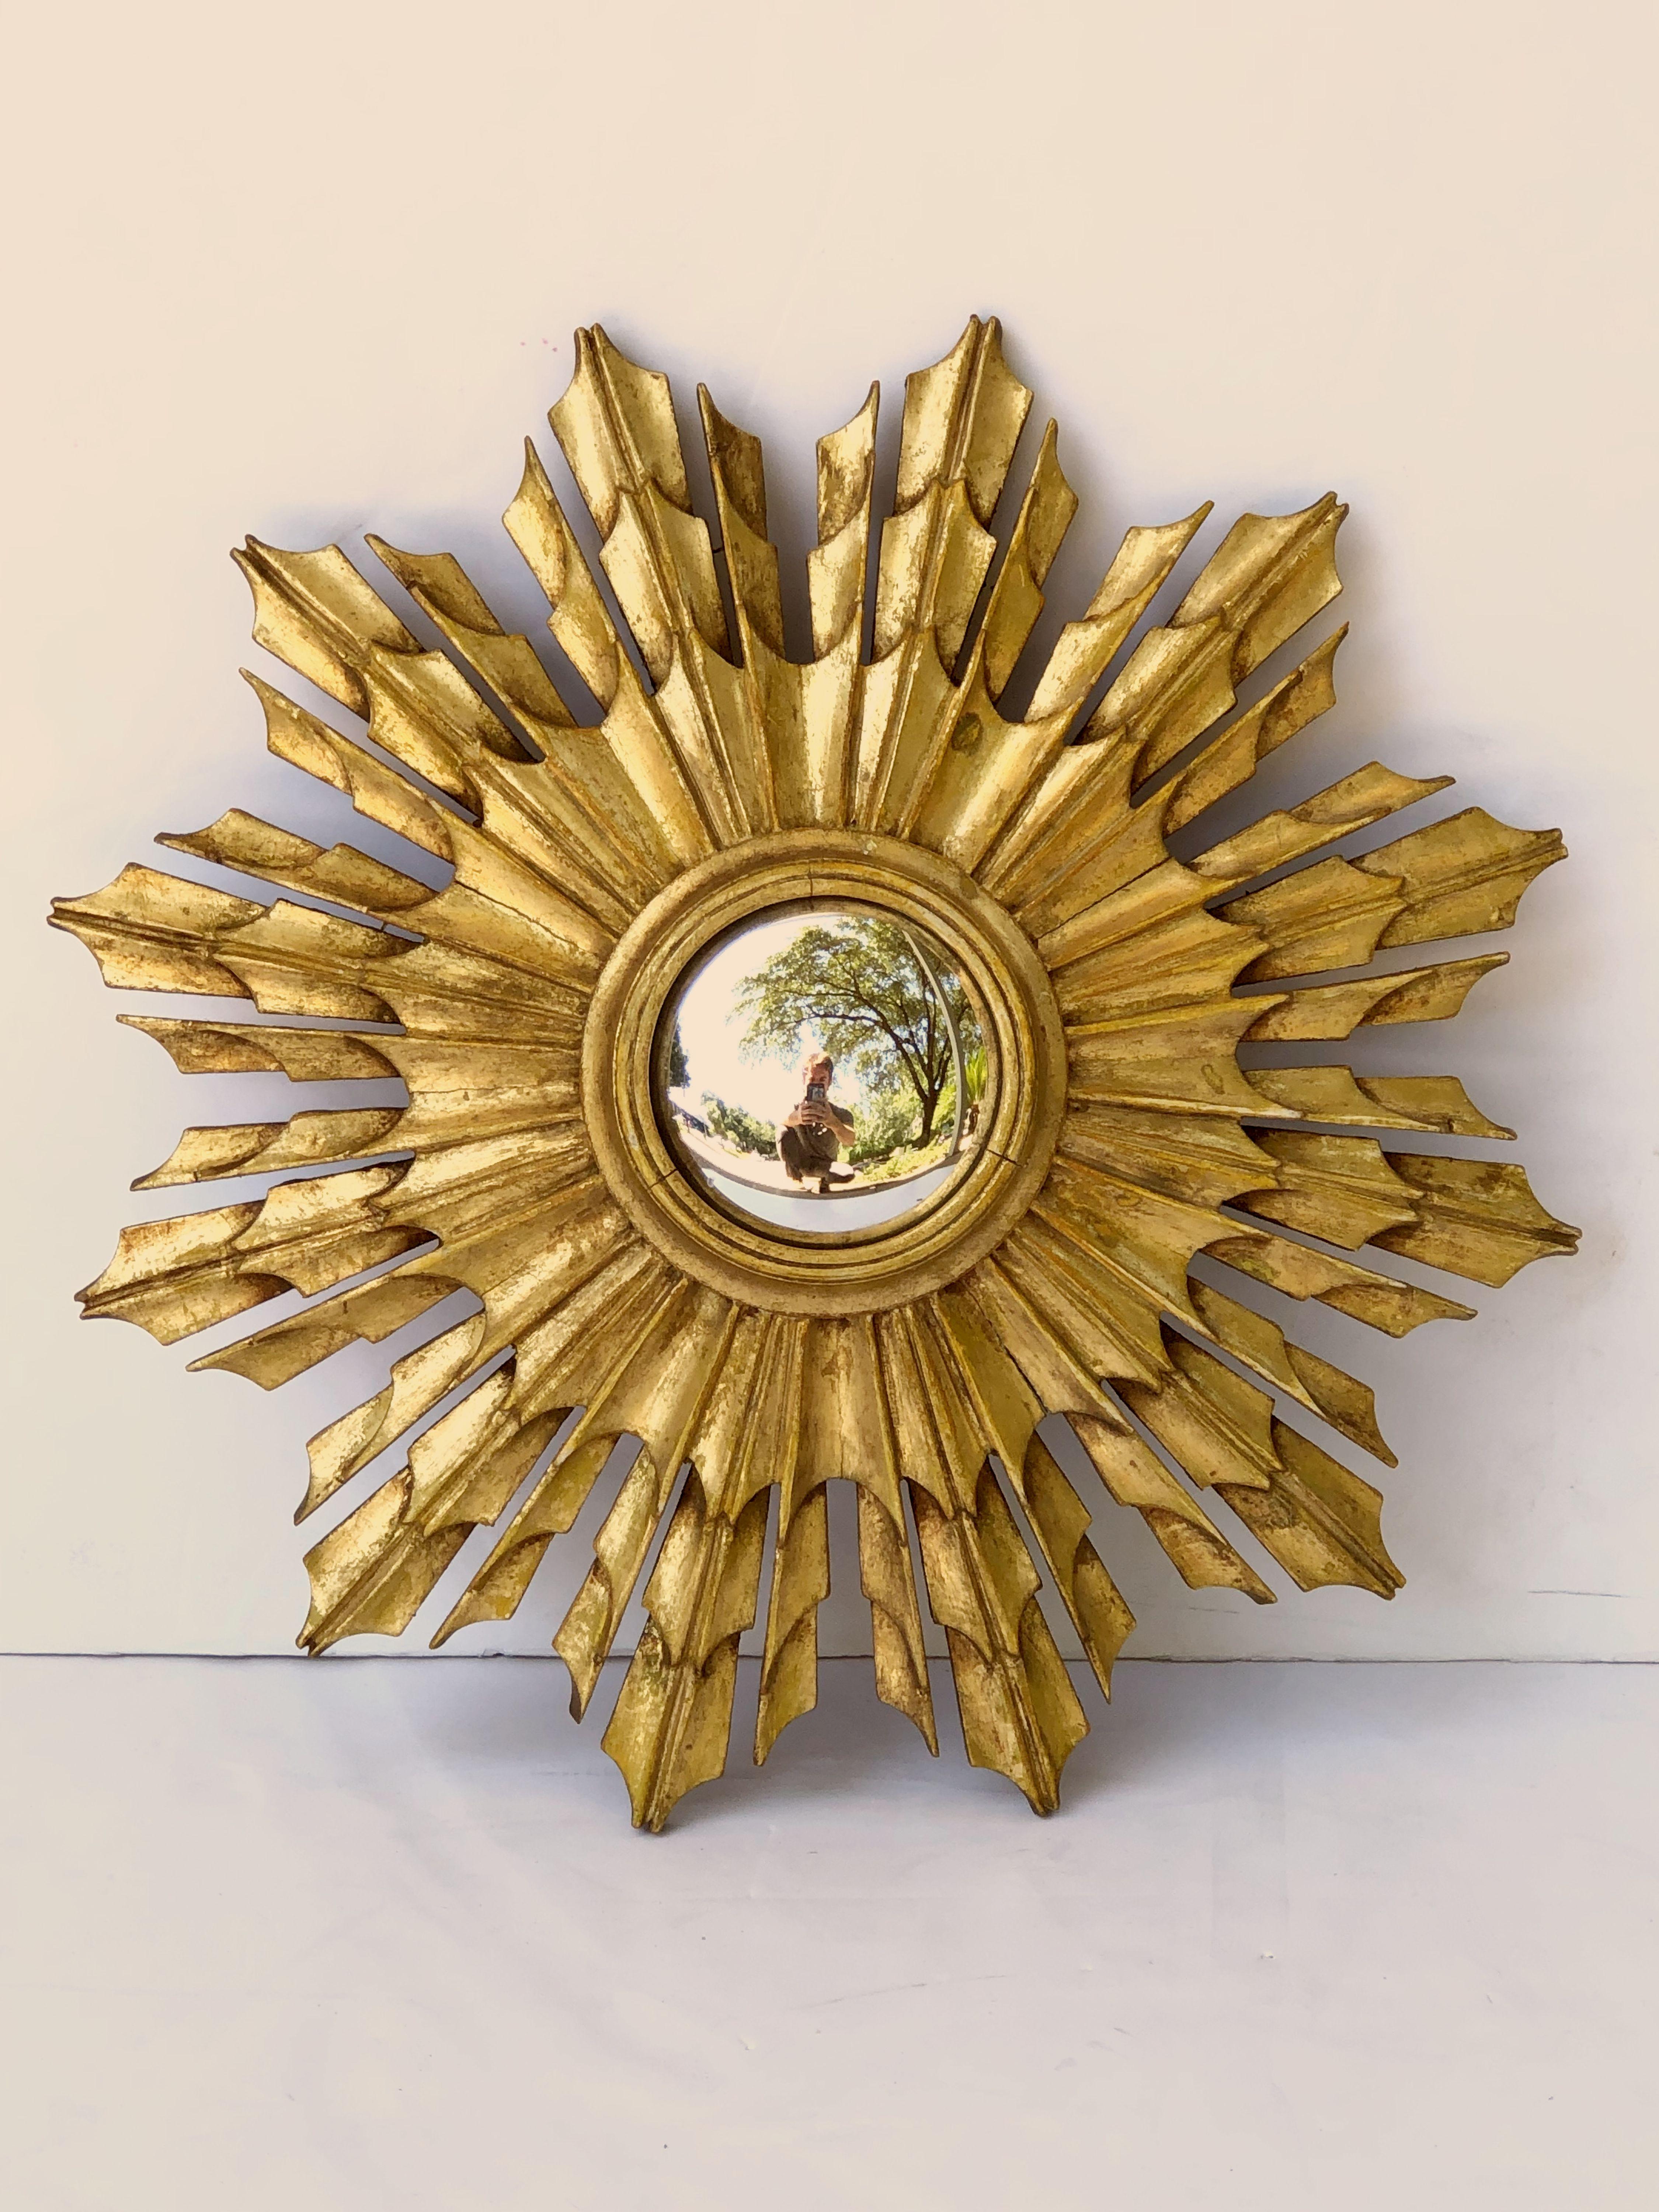 A lovely French gild sunburst (or starburst) mirror, 16 inches diameter with round mirrored convex glass center in a moulded frame.